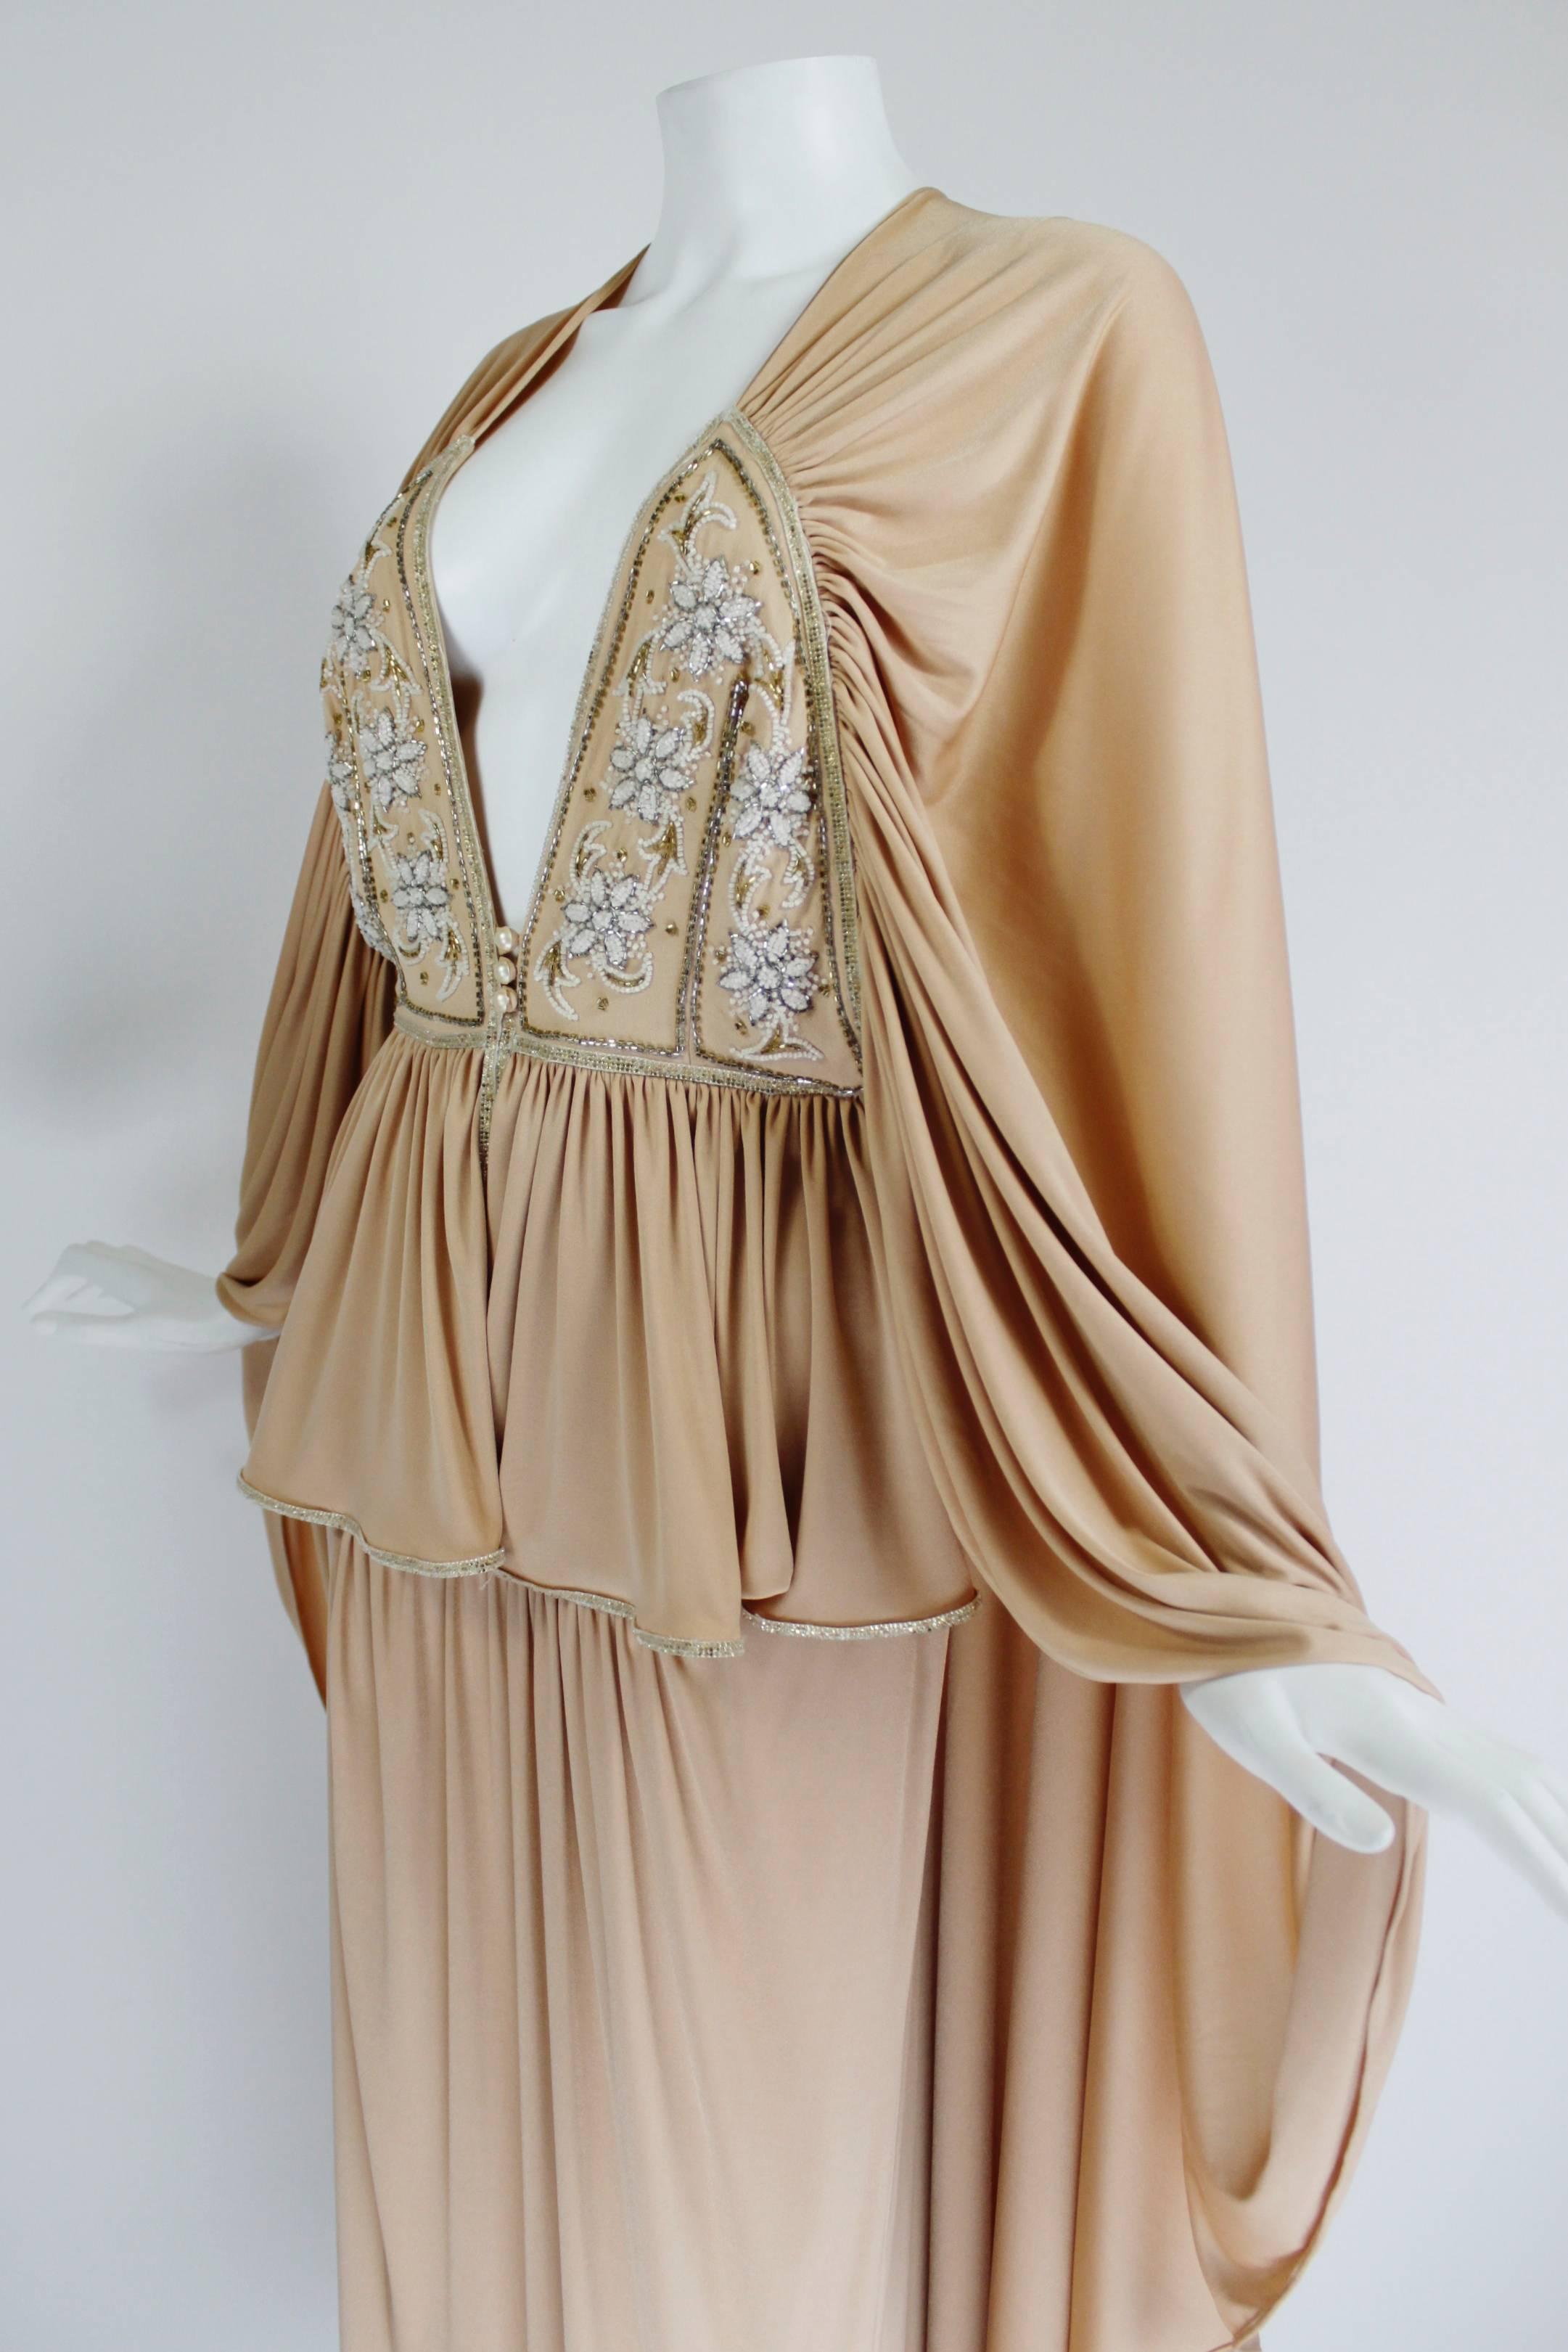 Women's 1970s Bill Gibb Ethereal Gown with Floral Beading and Plunging Neckline